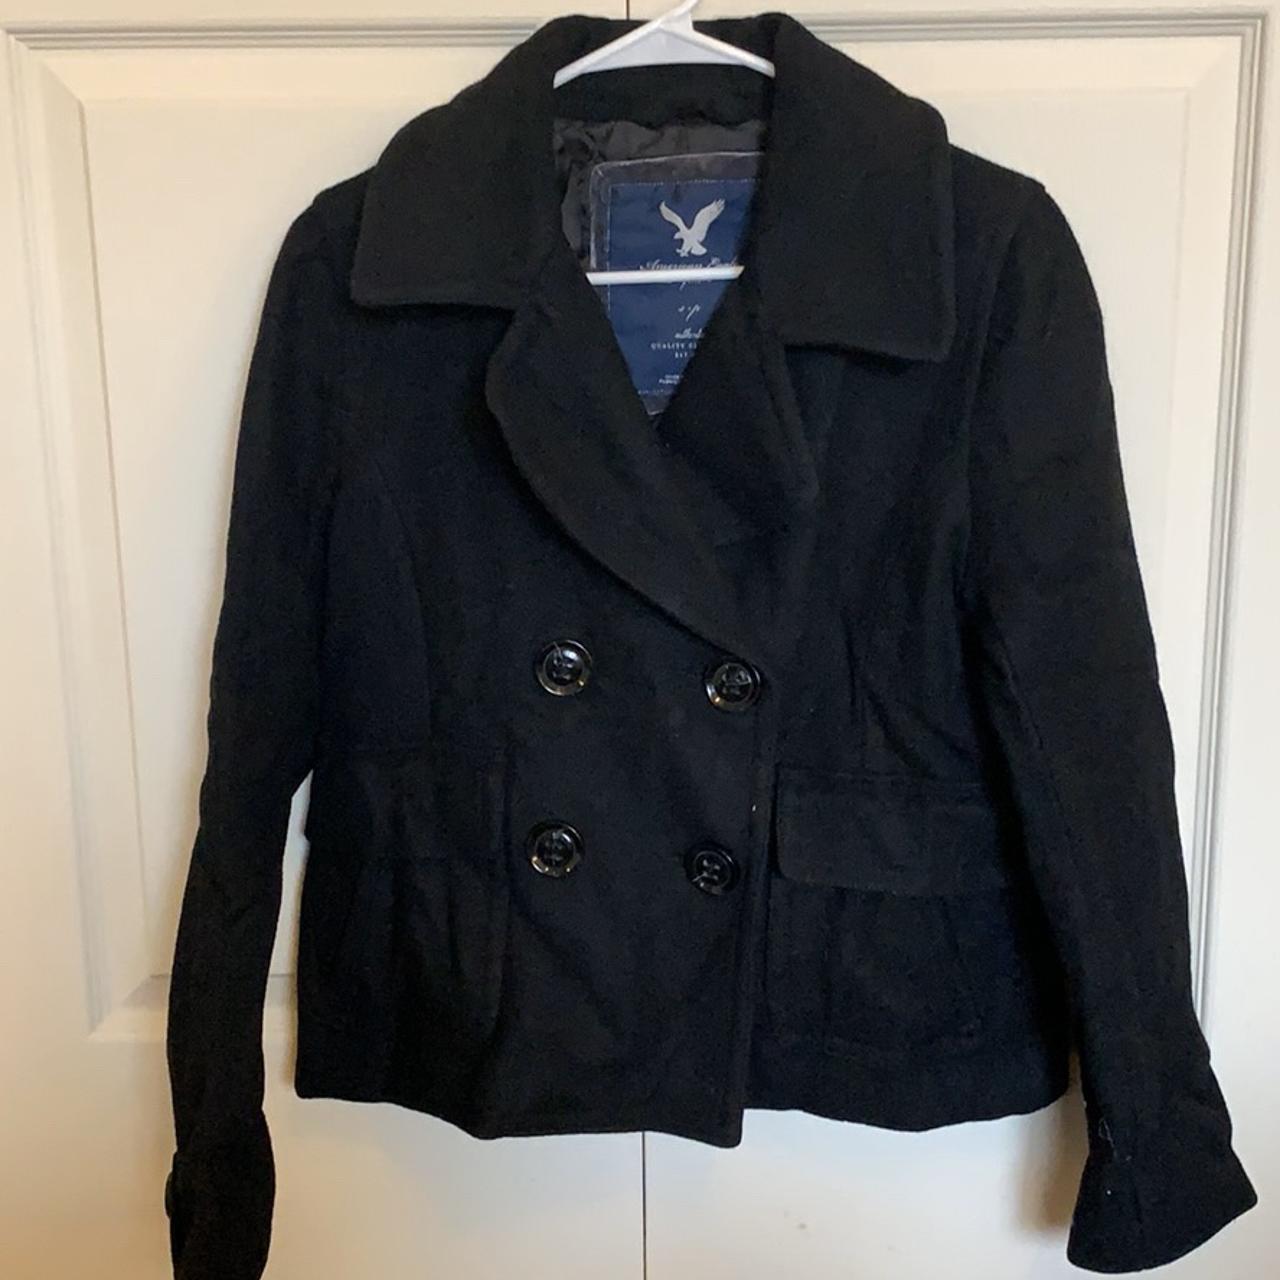 American Eagle Outfitters Women's Black Coat